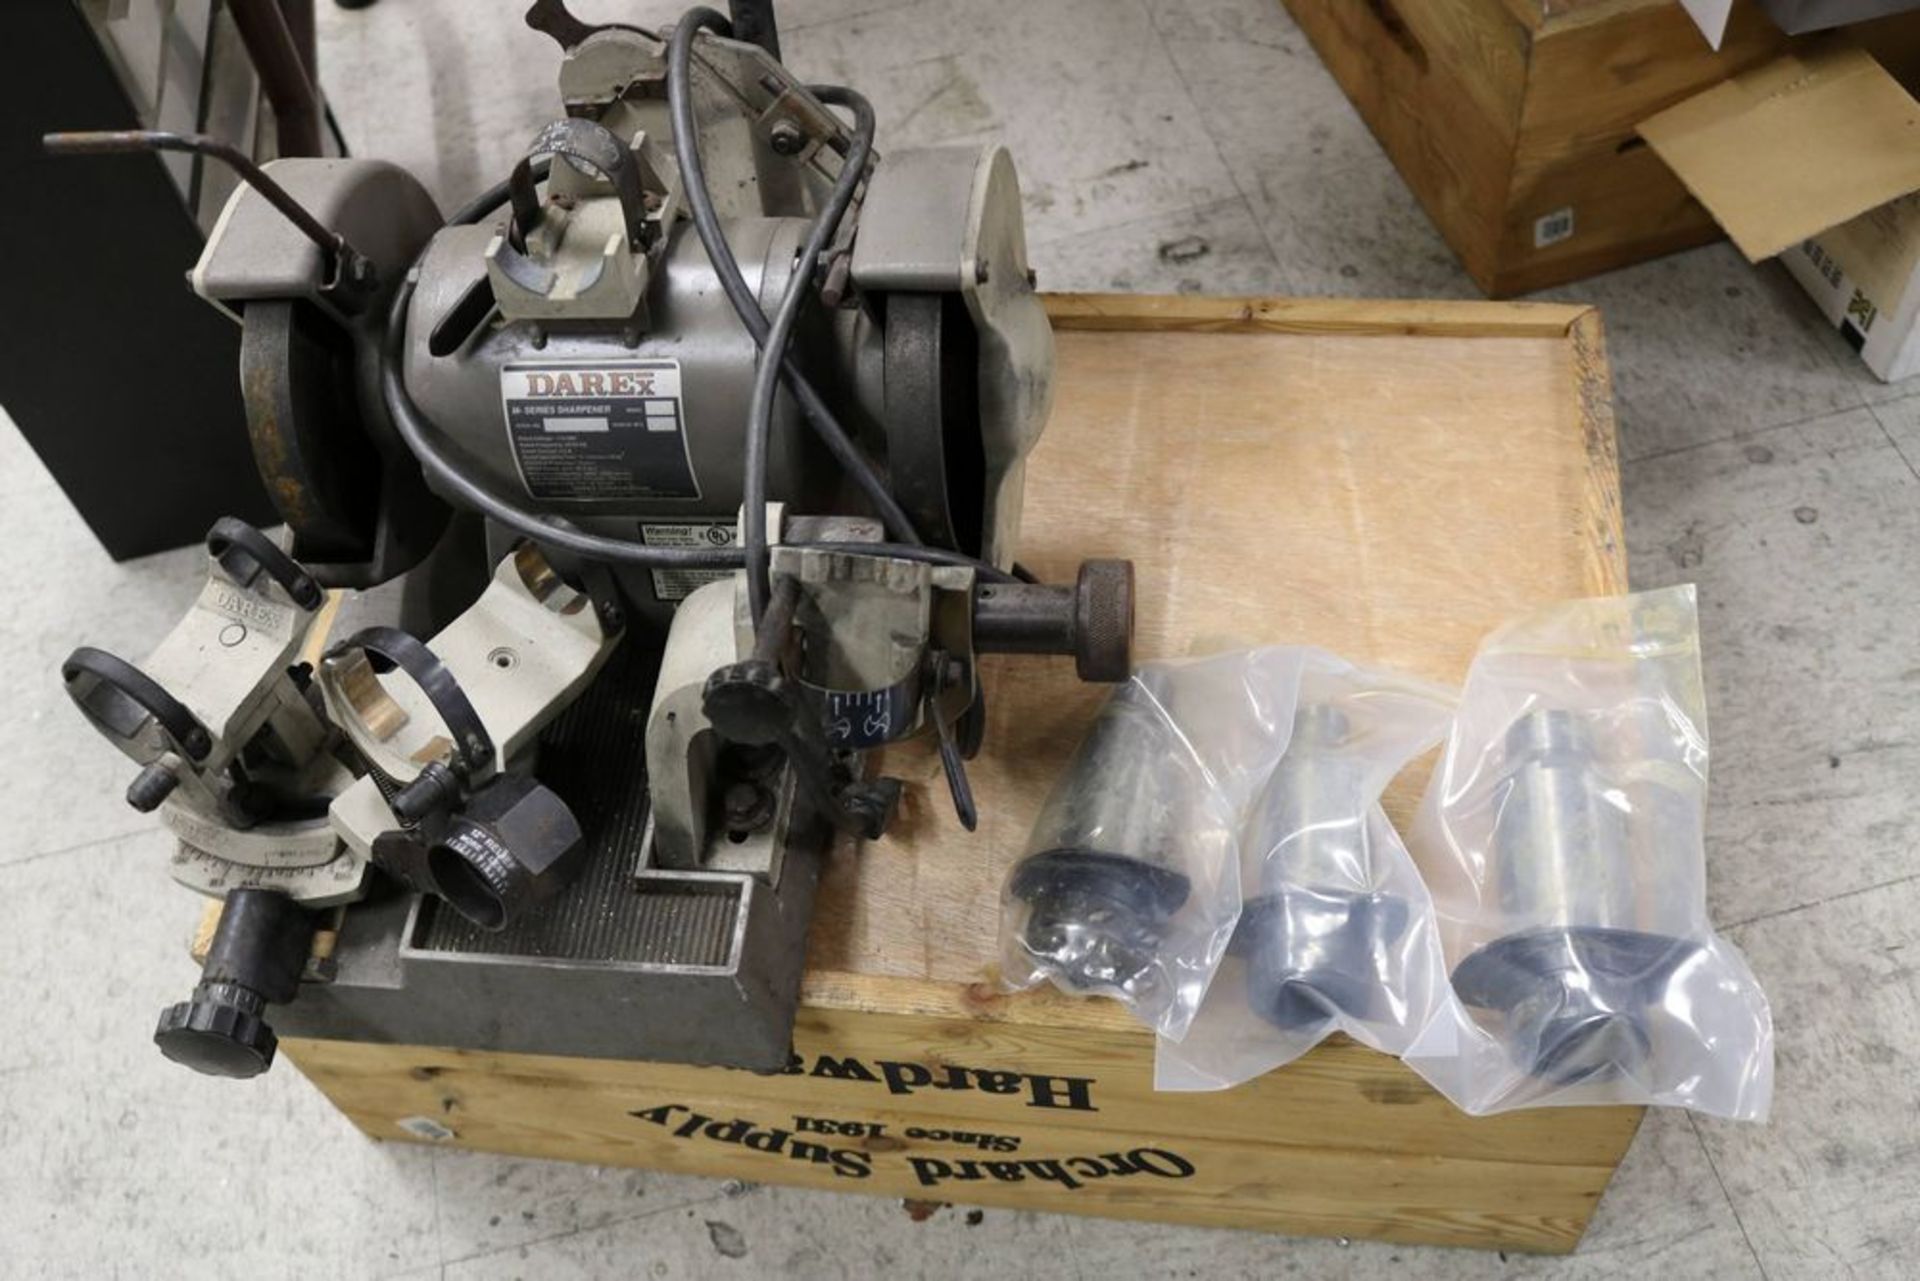 Used Darex M-Series Precision Tool Sharpener with Accessories and Tool Holders - Image 8 of 8